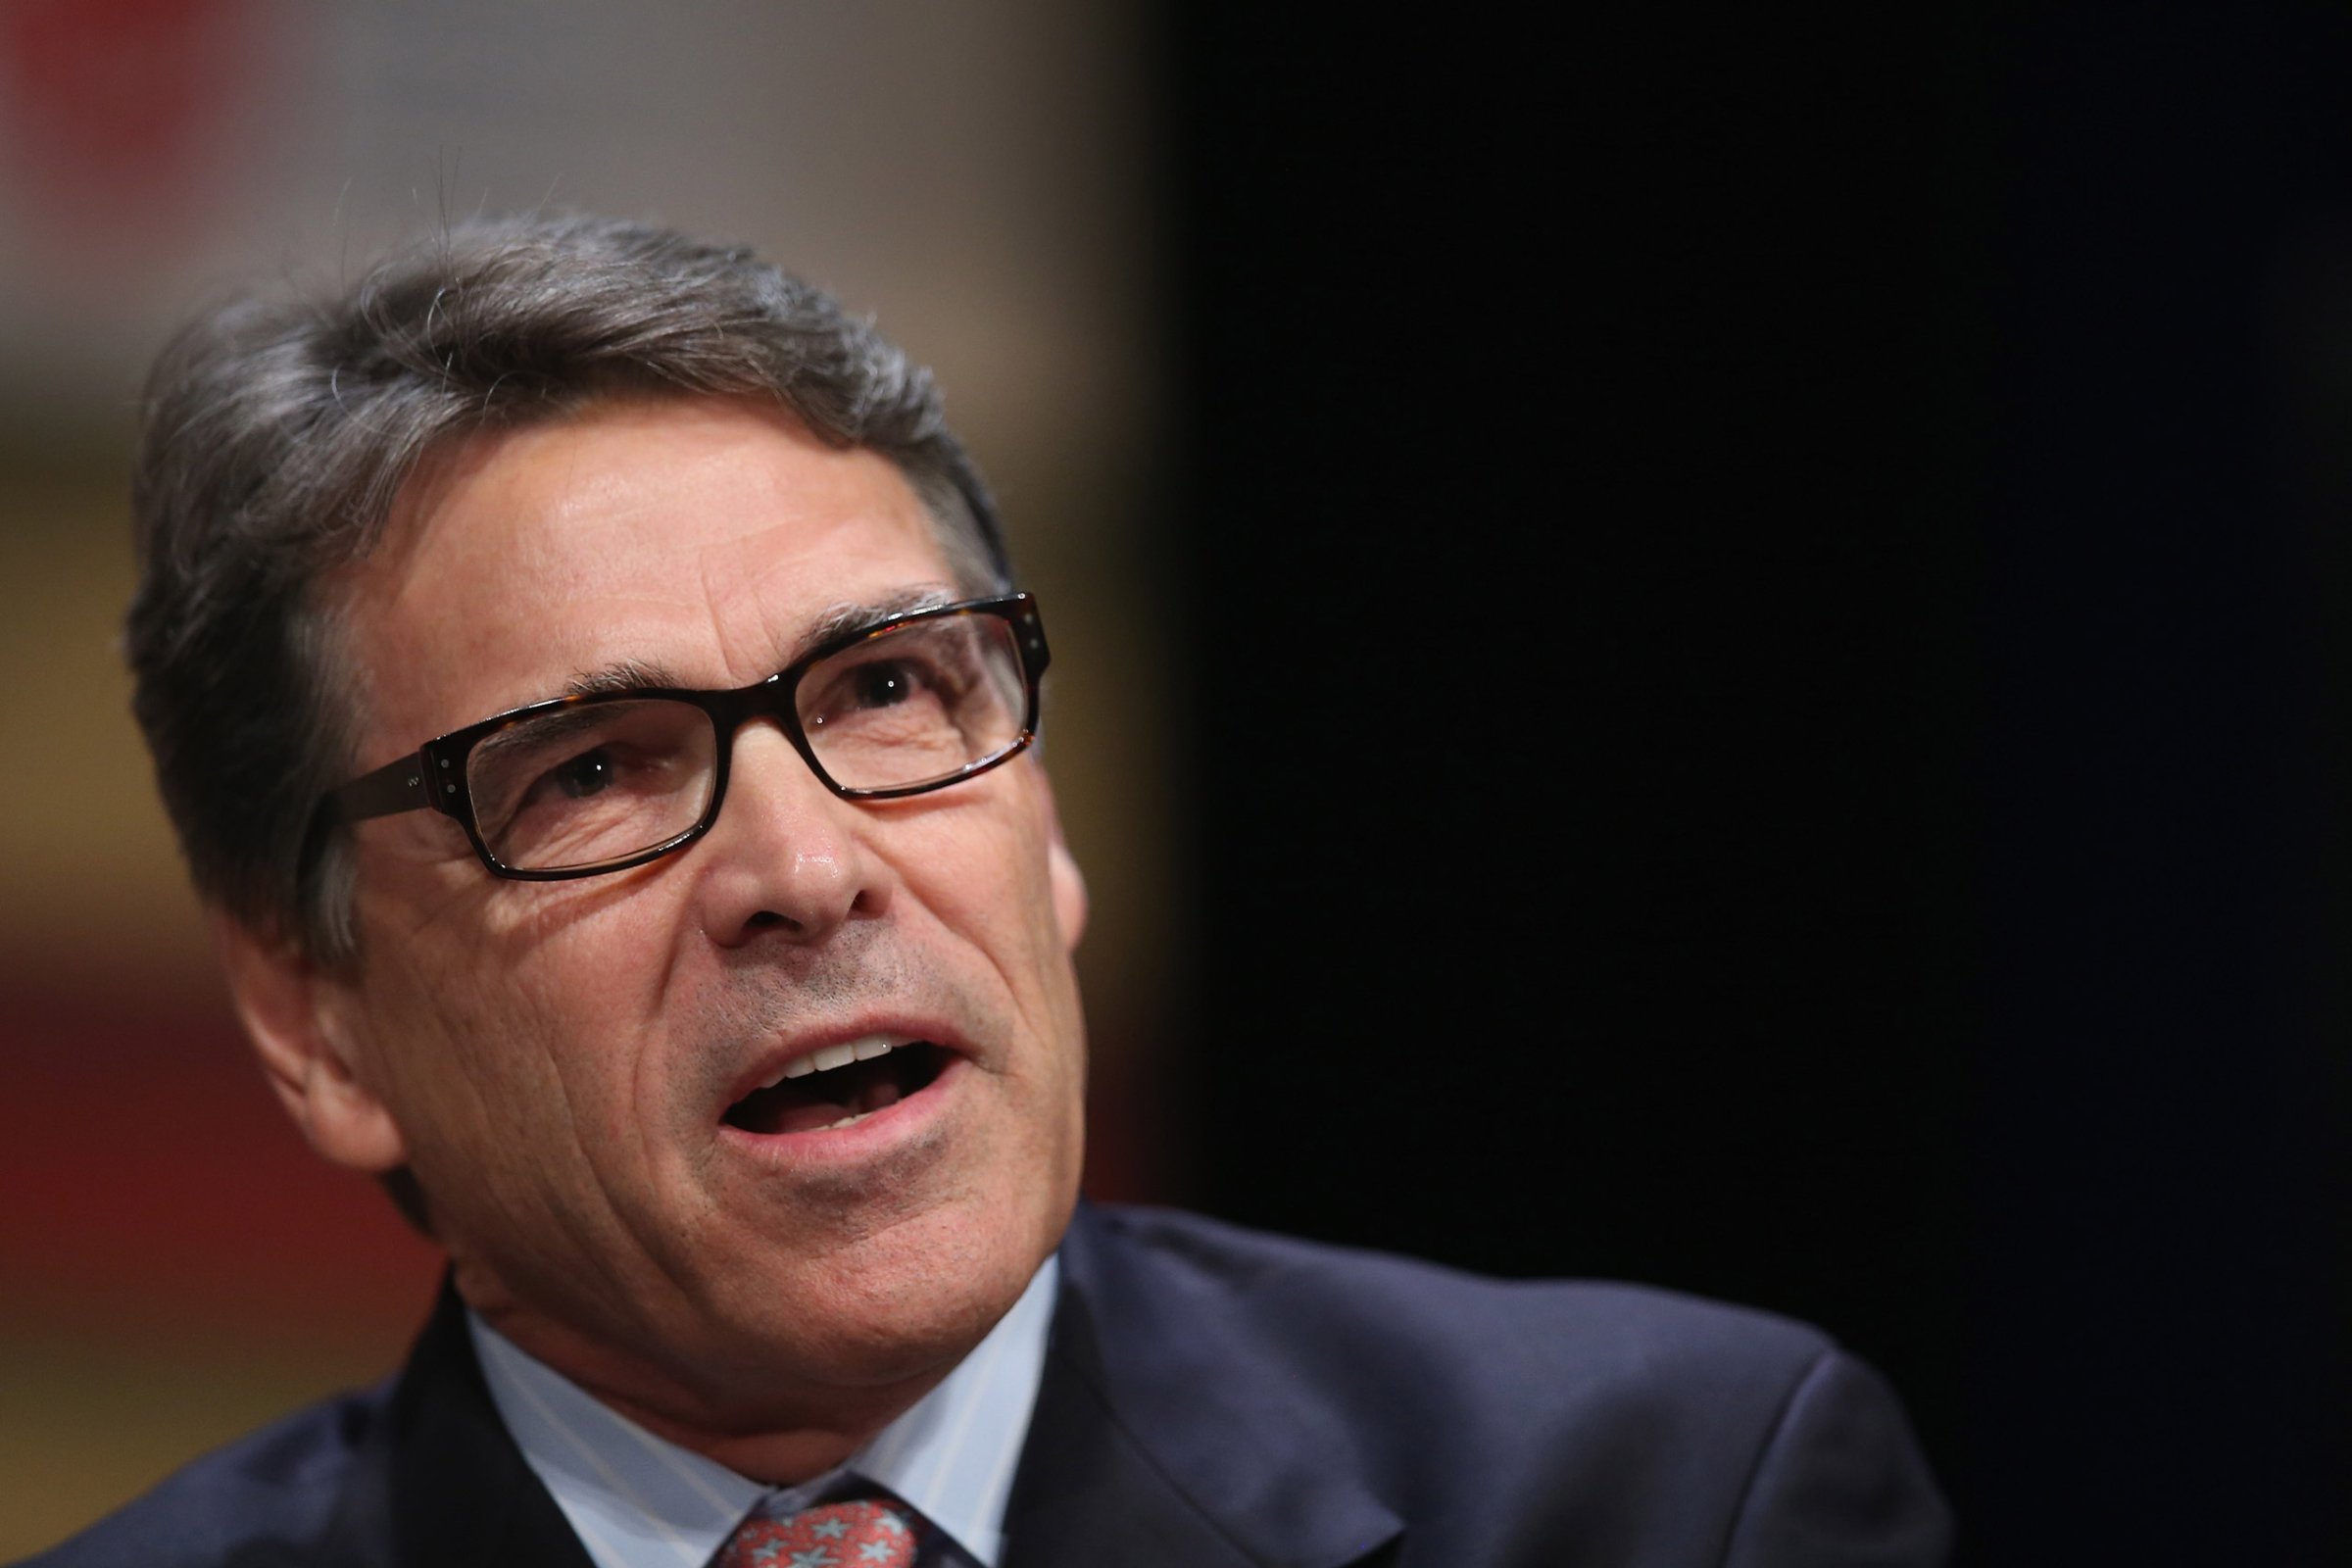 AMES, IA - JULY 18: Republican presidential candidate and former Texas Governor Rick Perry fields questions at The Family Leadership Summit at Stephens Auditorium on July 18, 2015 in Ames, Iowa. According to the organizers the purpose of The Family Leadership Summit is to inspire, motivate, and educate conservatives. (Photo by Scott Olson/Getty Images)